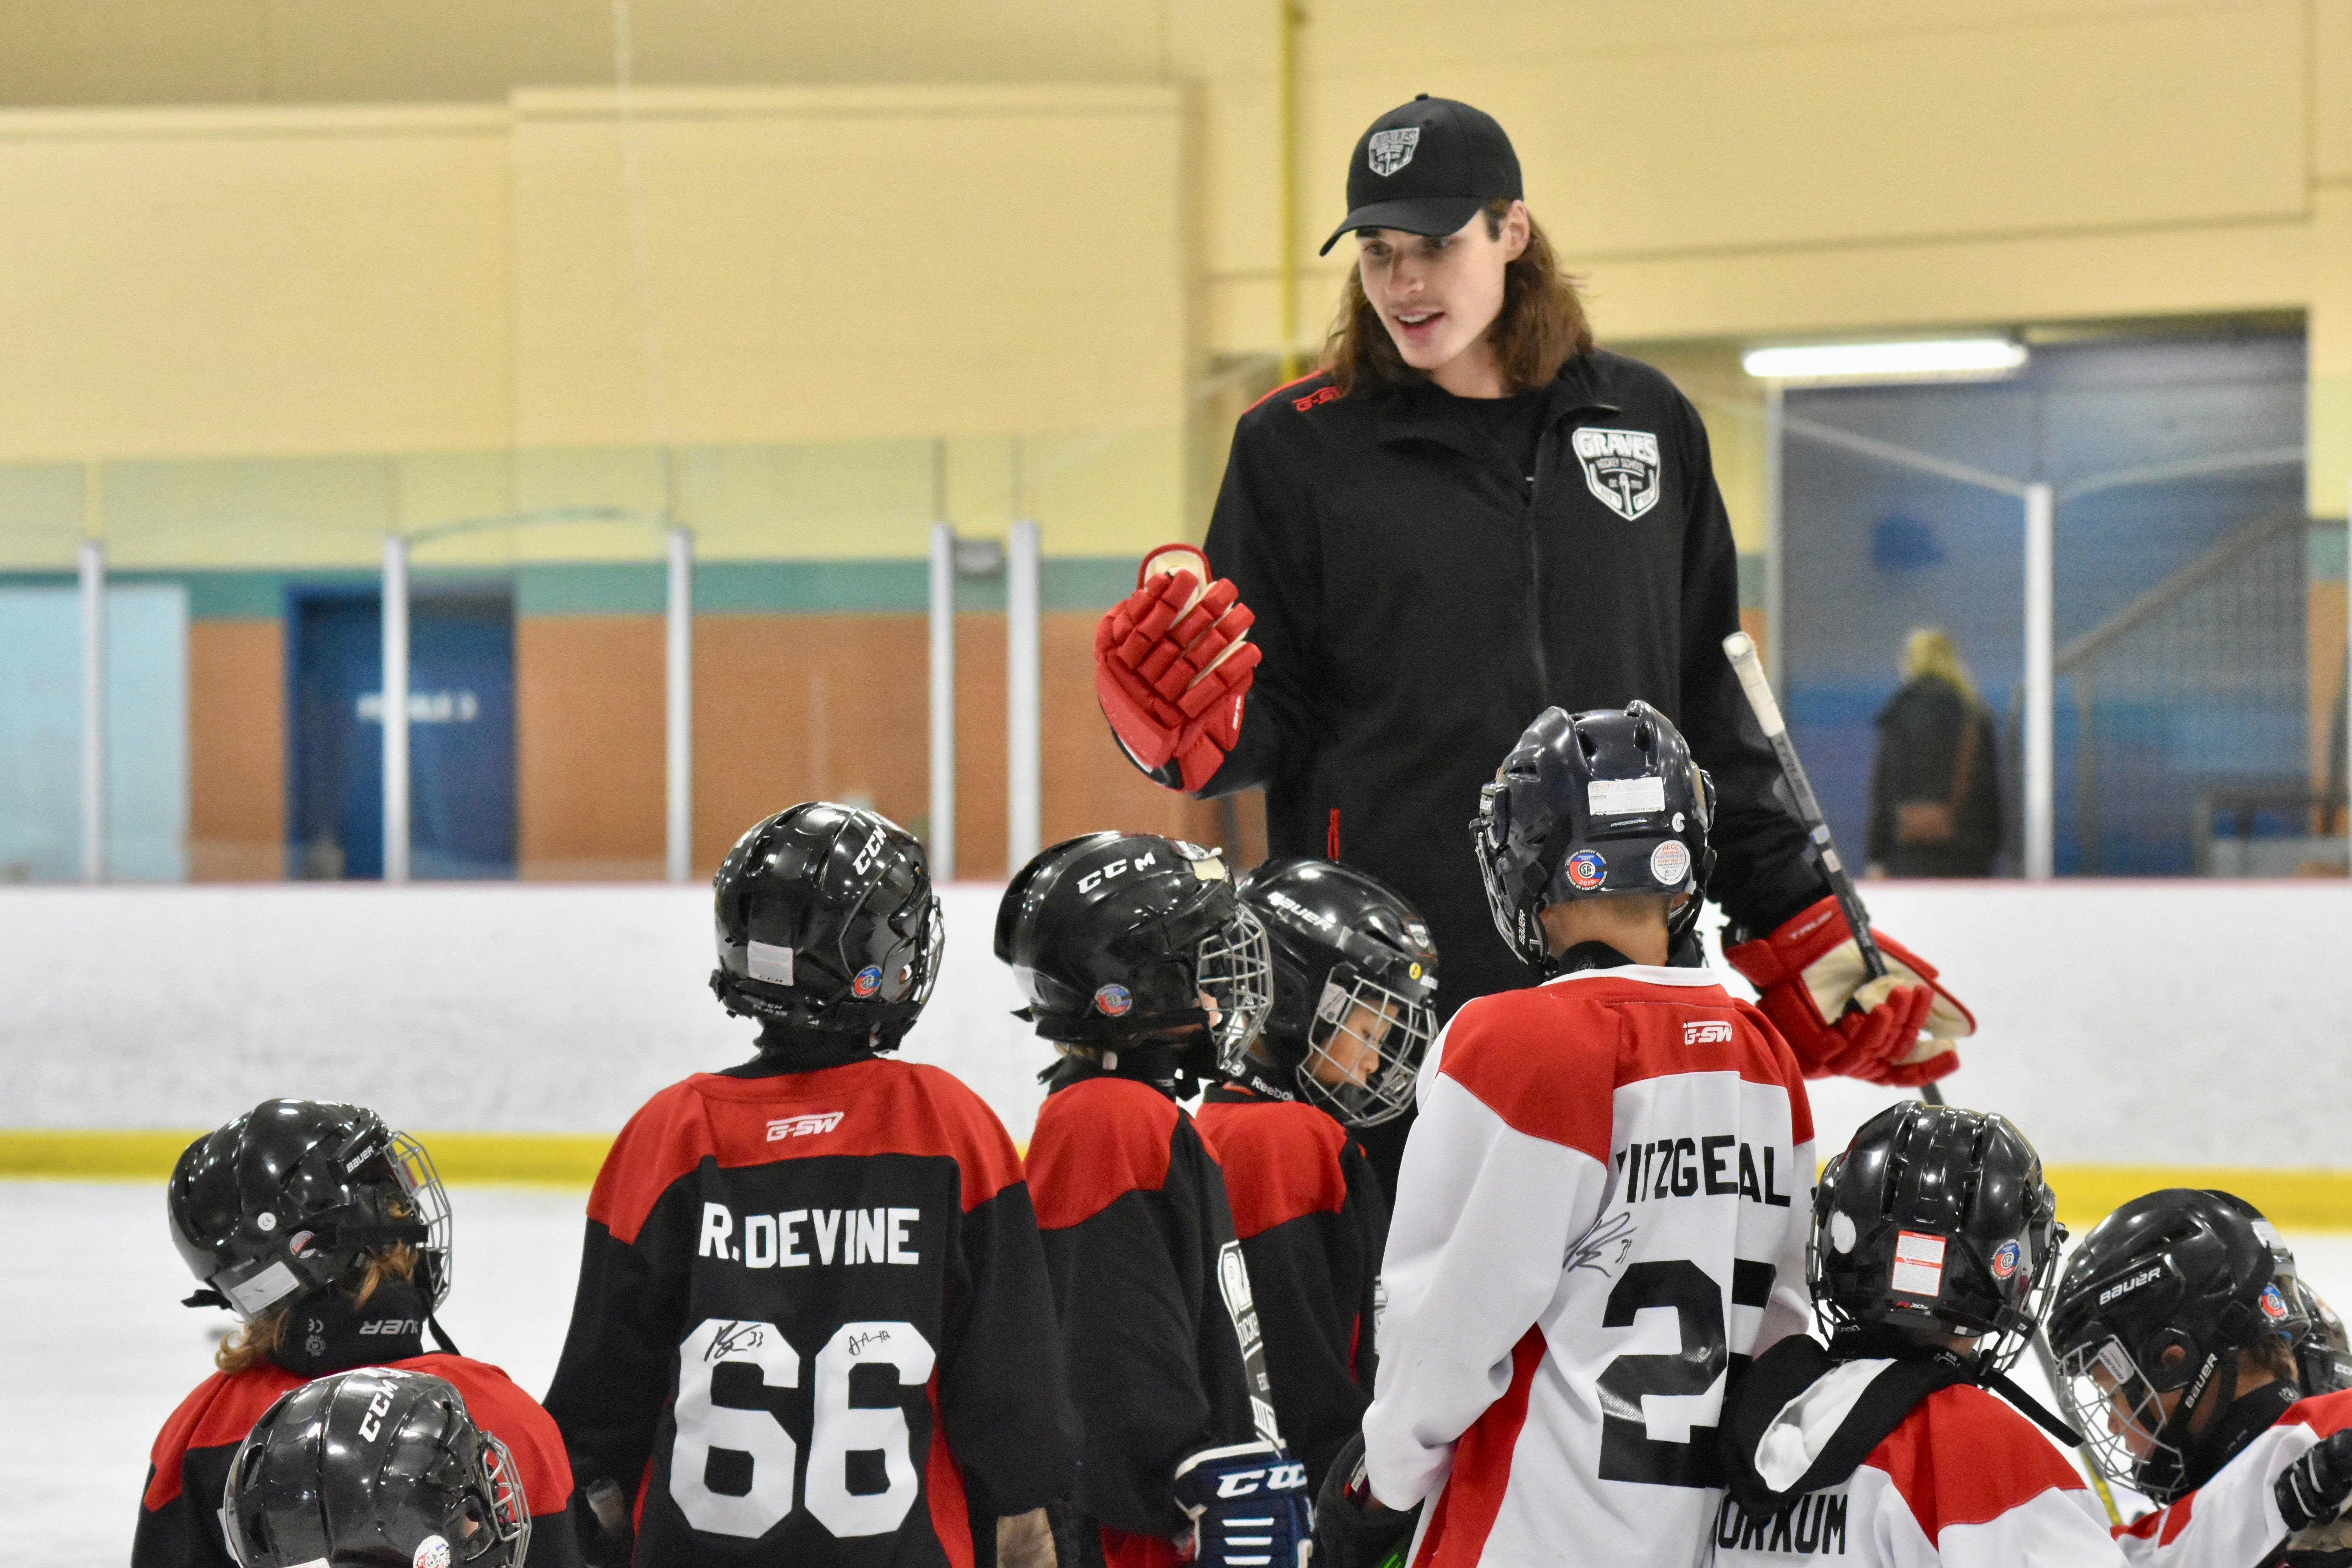 NHLer Ryan Graves excited to work with minor hockey youth at camp